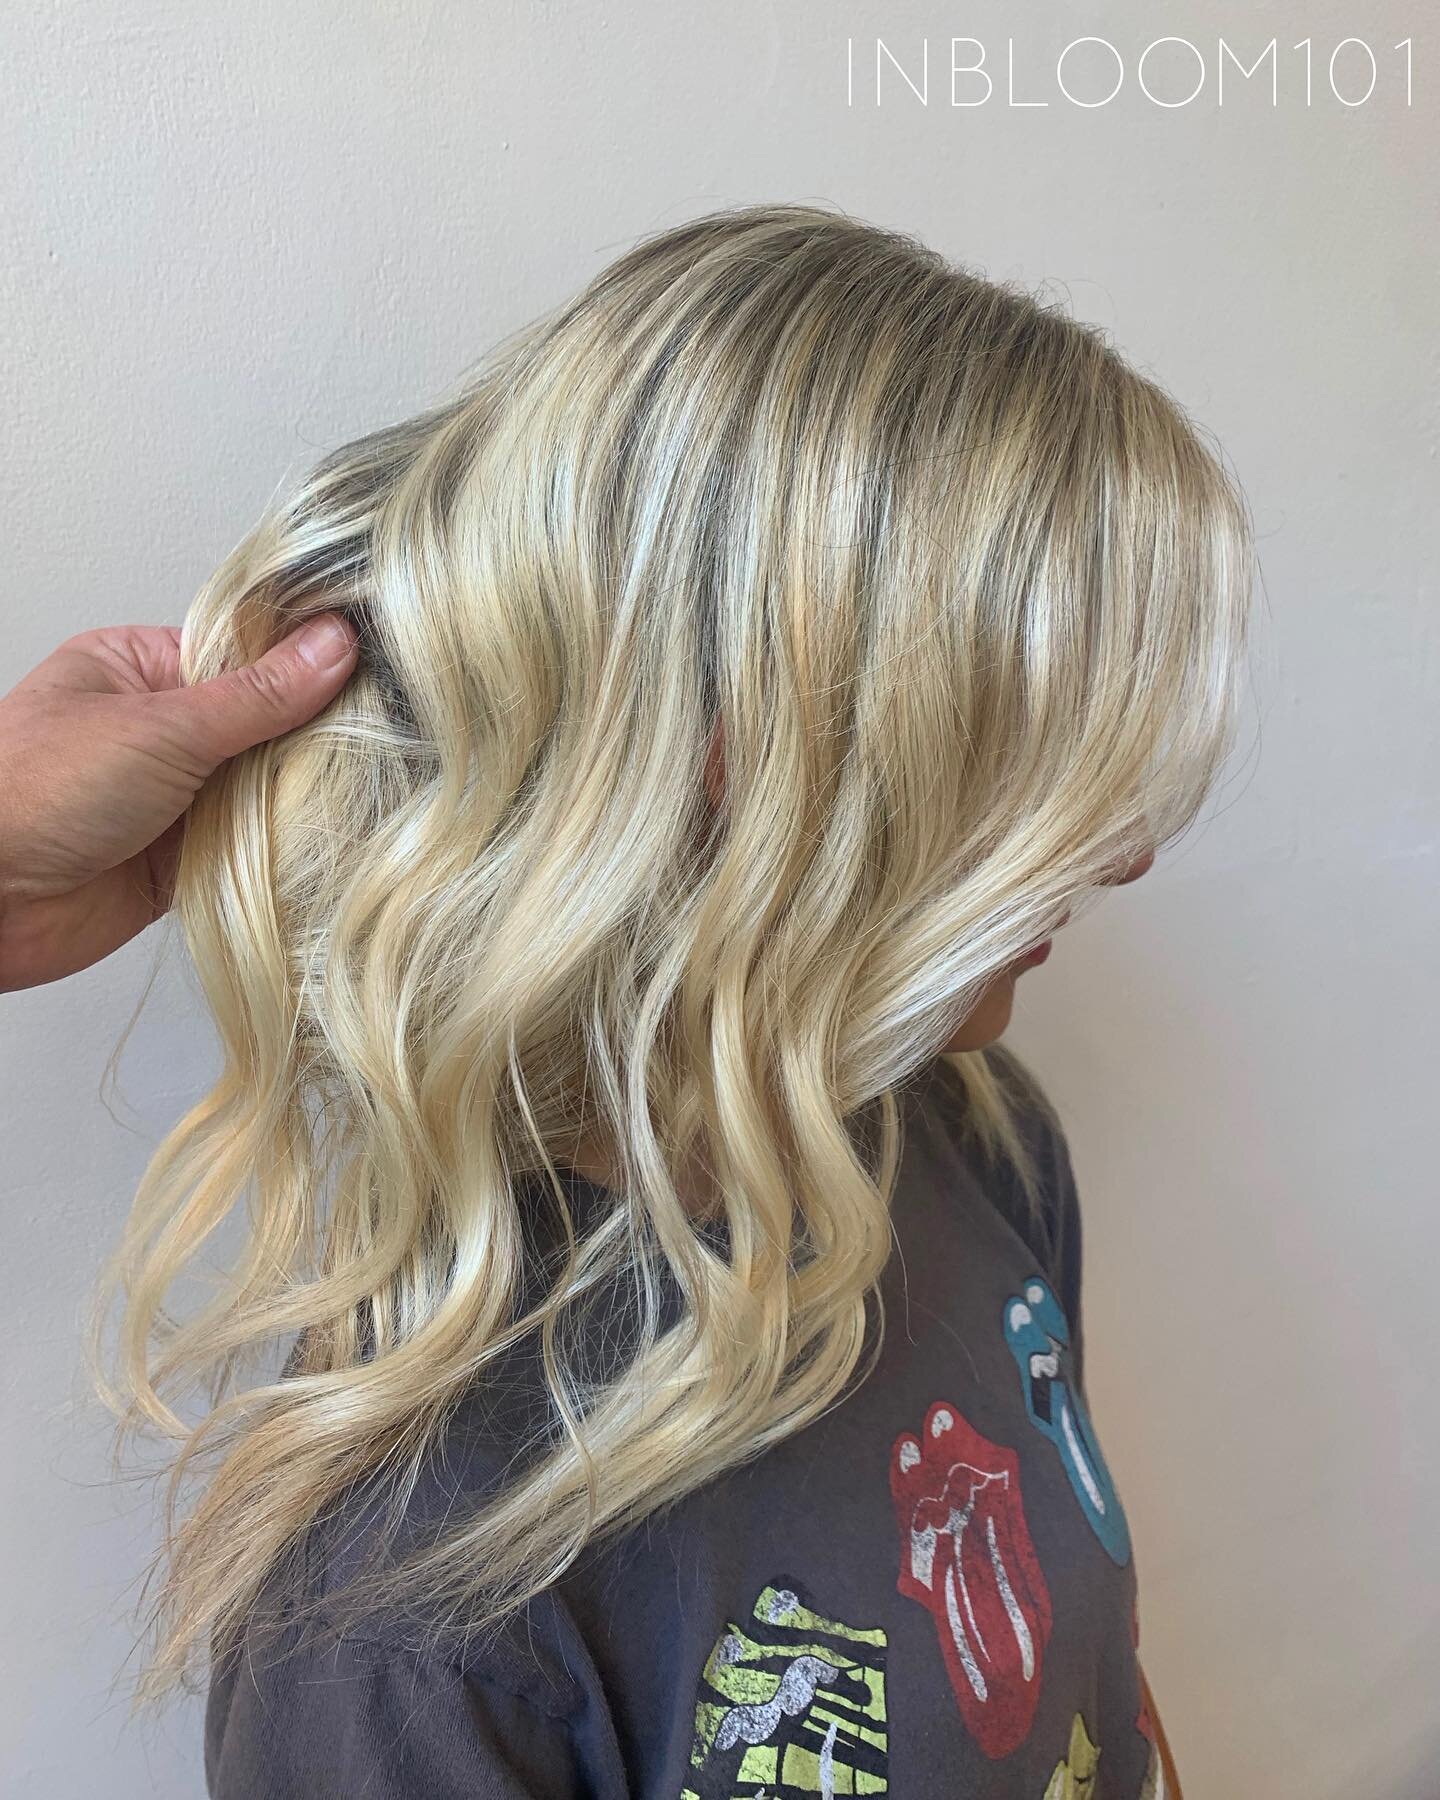 She was ready to step her hair color game up with champagne blonde 🥂
.
Check out her before picture! In one session I was able to get her from a level 6 (light brown) to a level 10 (virgin hair 😉) 
.
.
.
.
📲INBLOOM101.com for online booking 
.
.
.